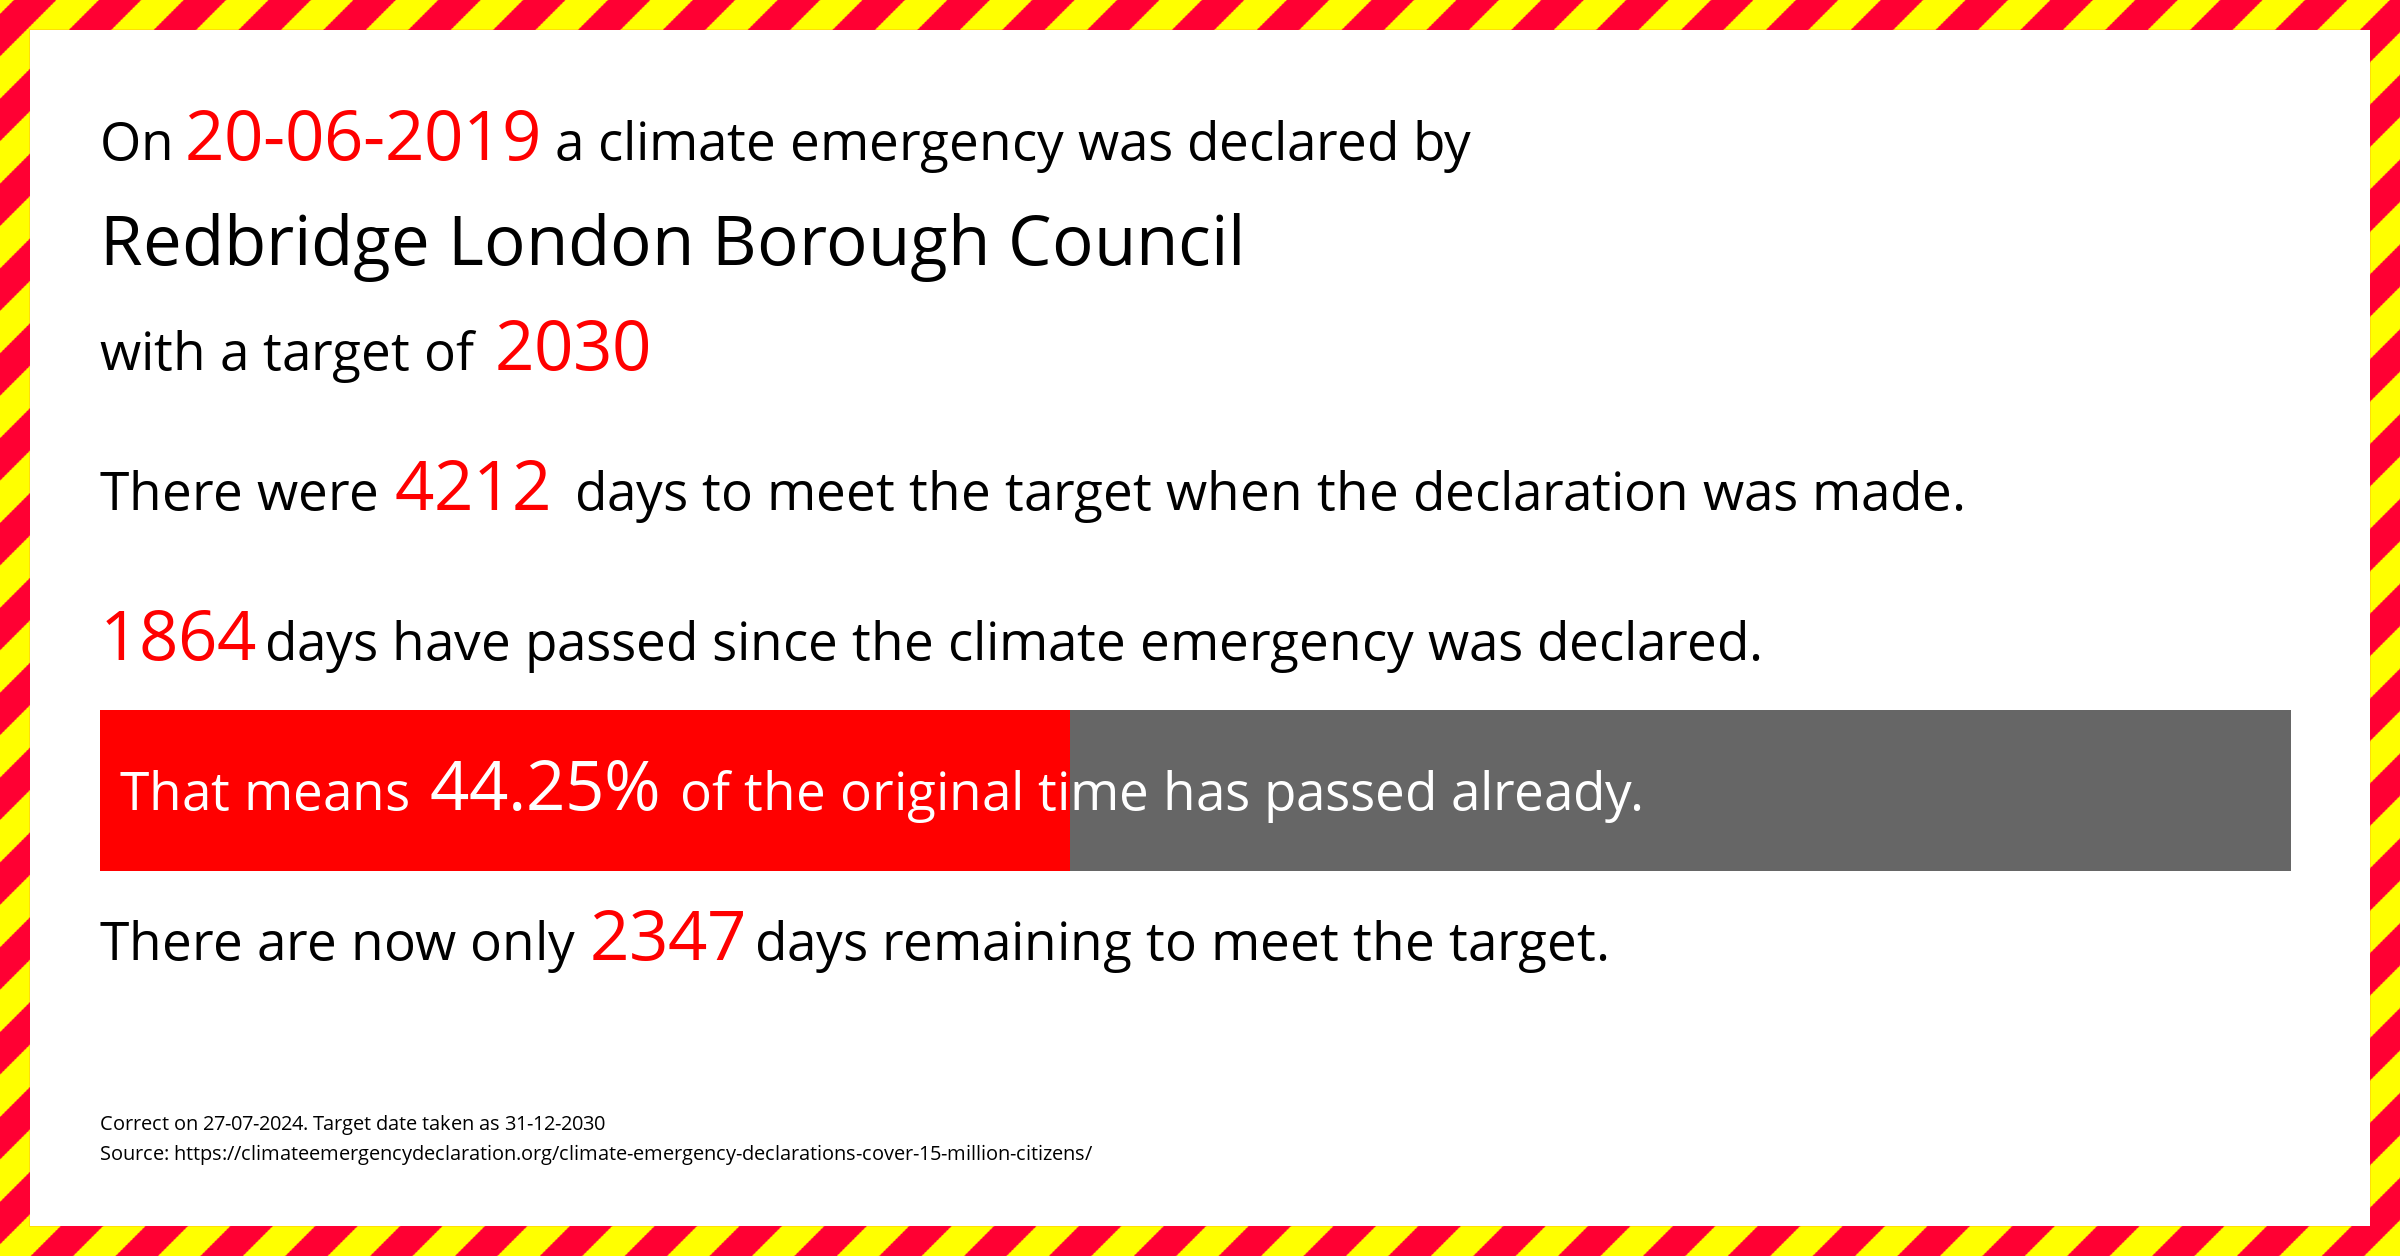 Redbridge London Borough Council declared a Climate emergency on Thursday 20th June 2019, with a target of 2030.